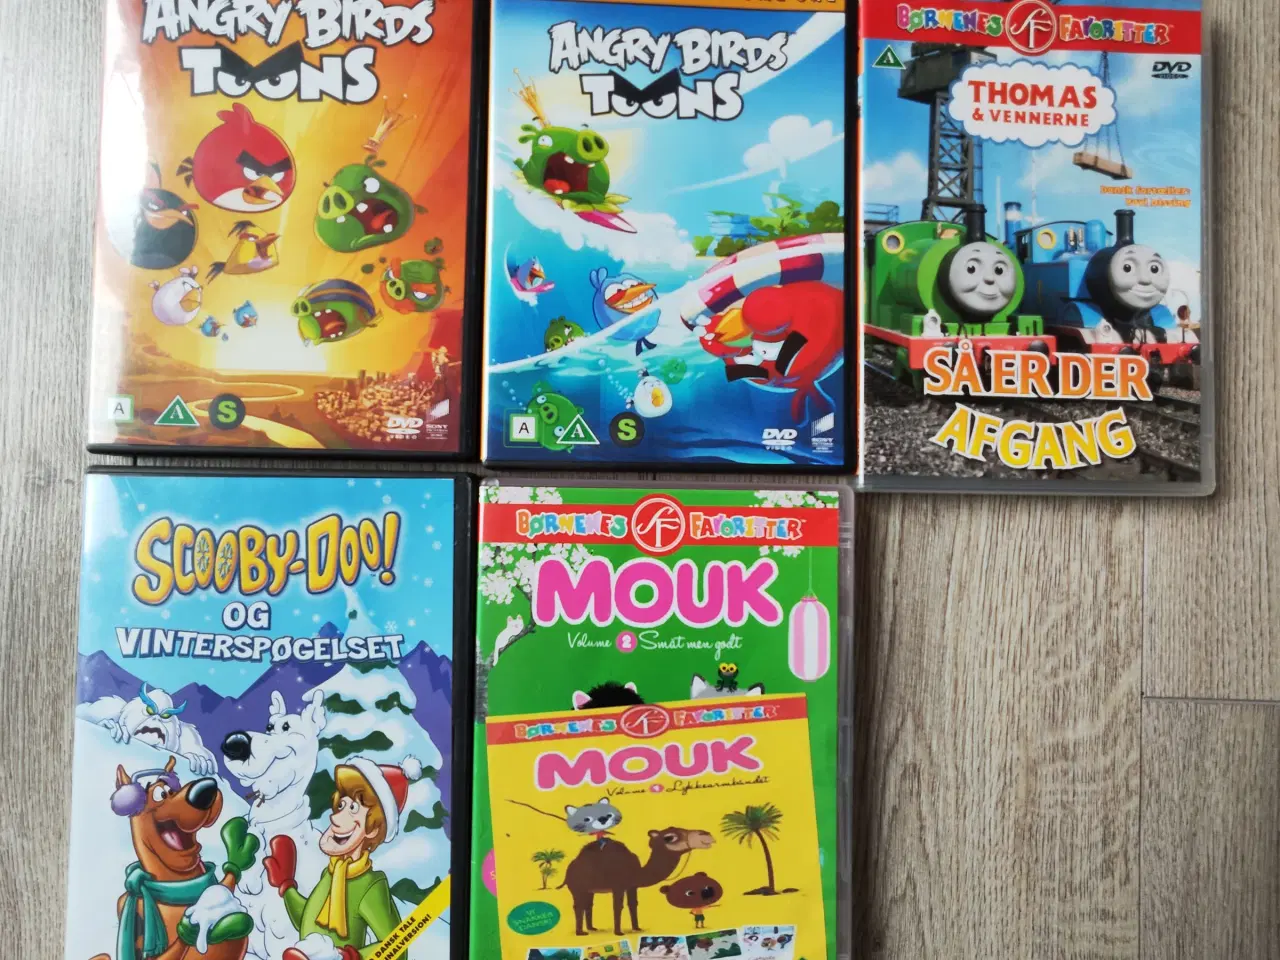 Billede 1 - DVD Angry Birds Thomas Tog Scooby Doo Mouk 